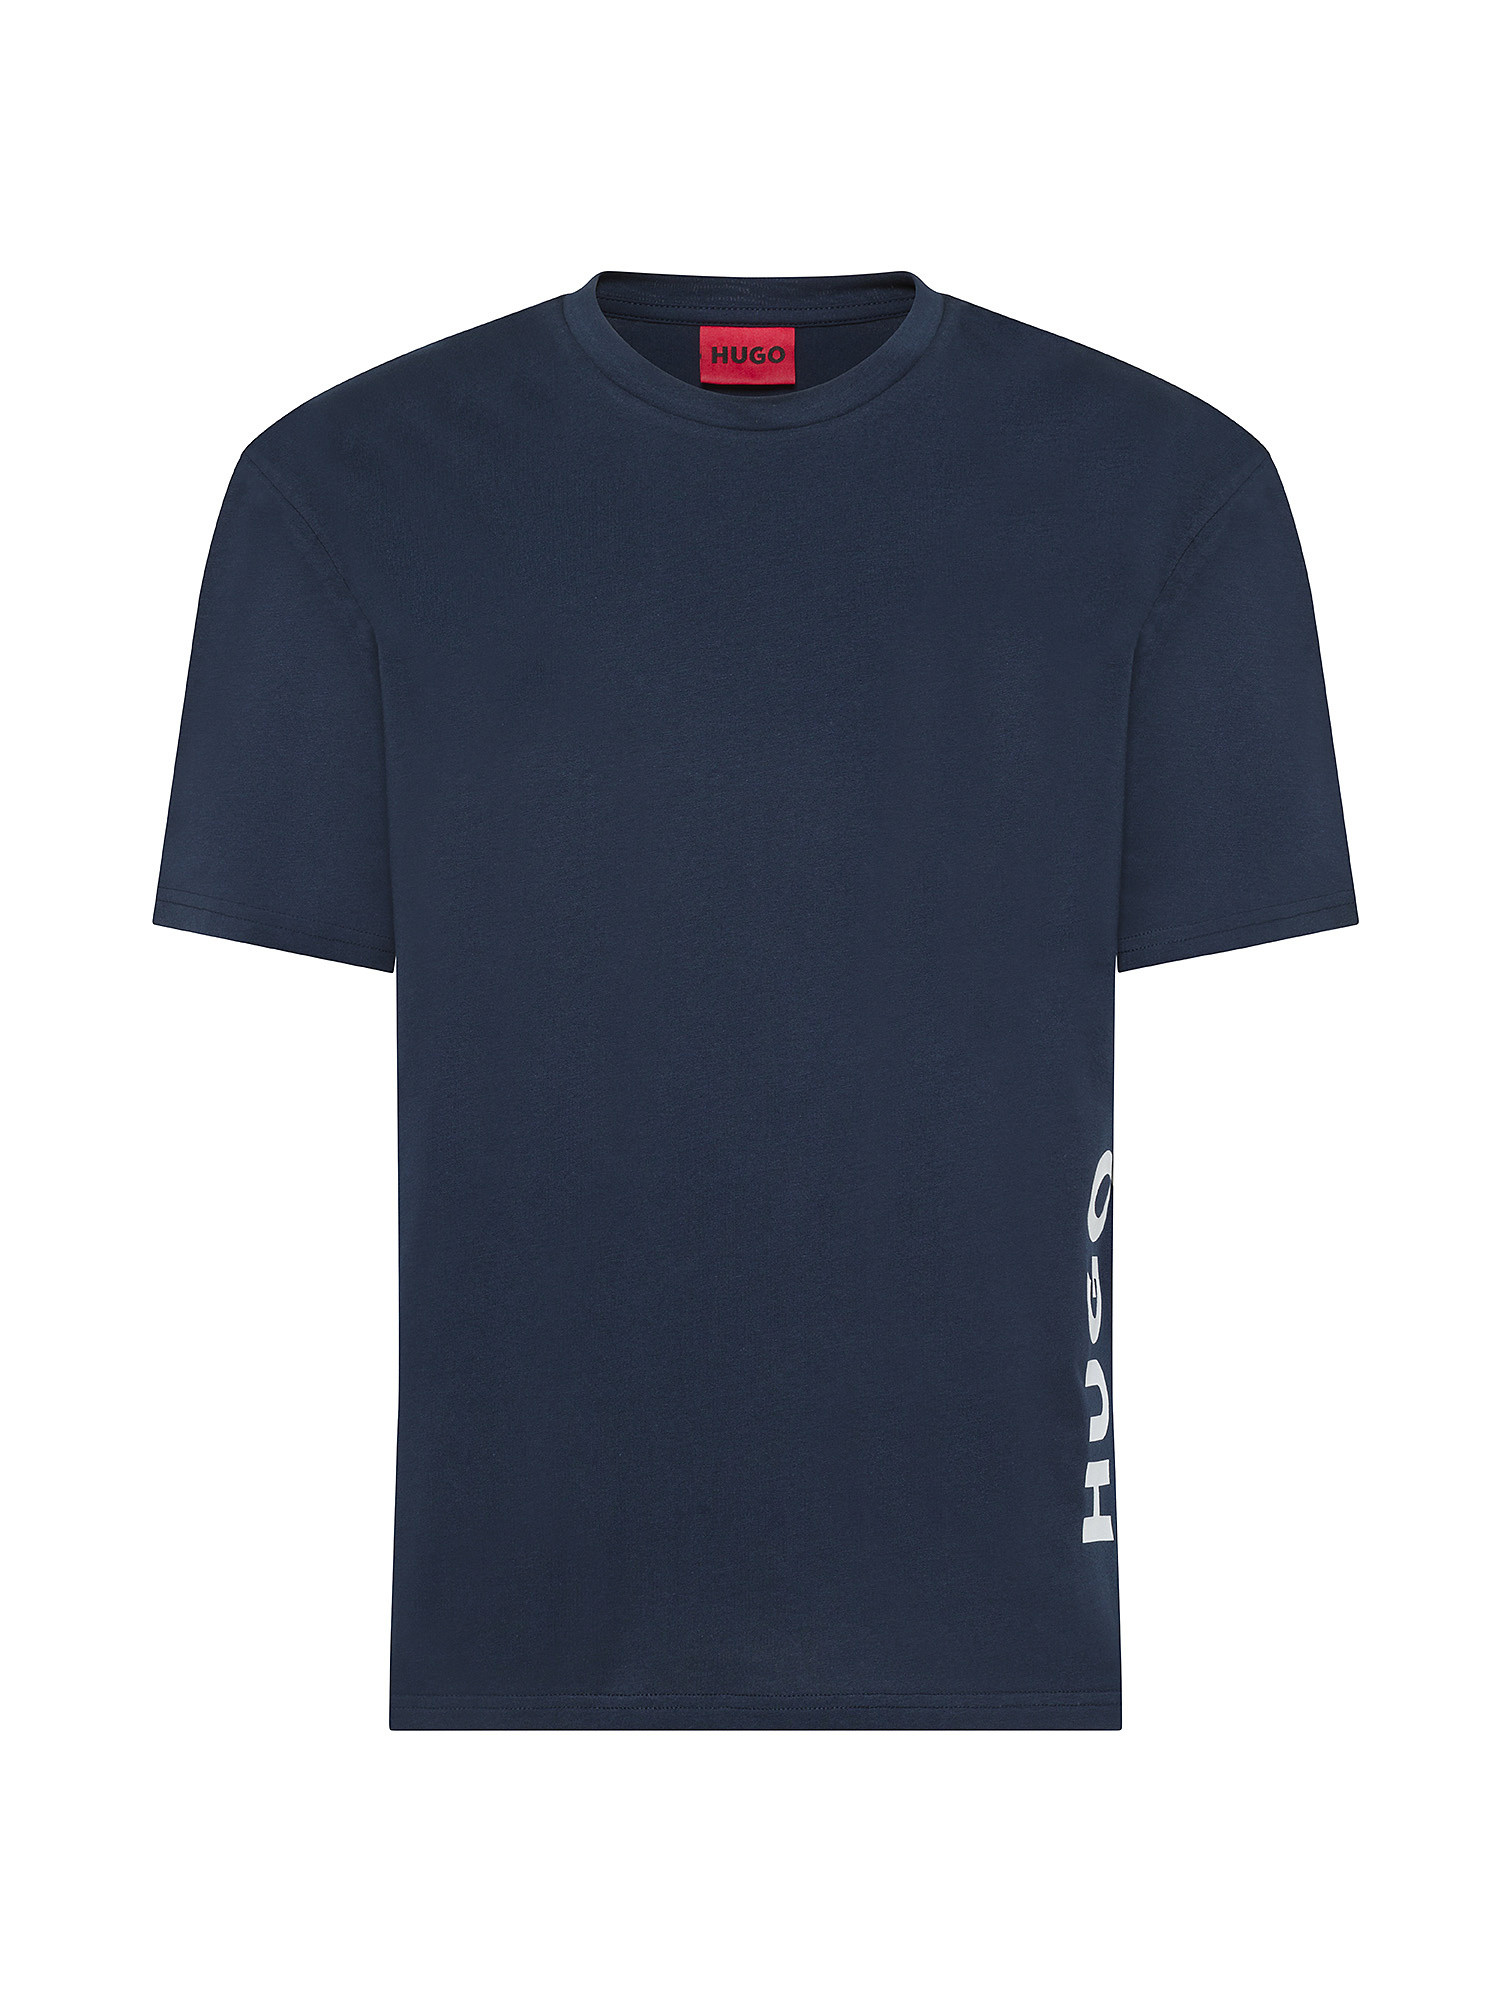 Hugo - T-shirt con stampa logo in cotone, Blu scuro, large image number 0